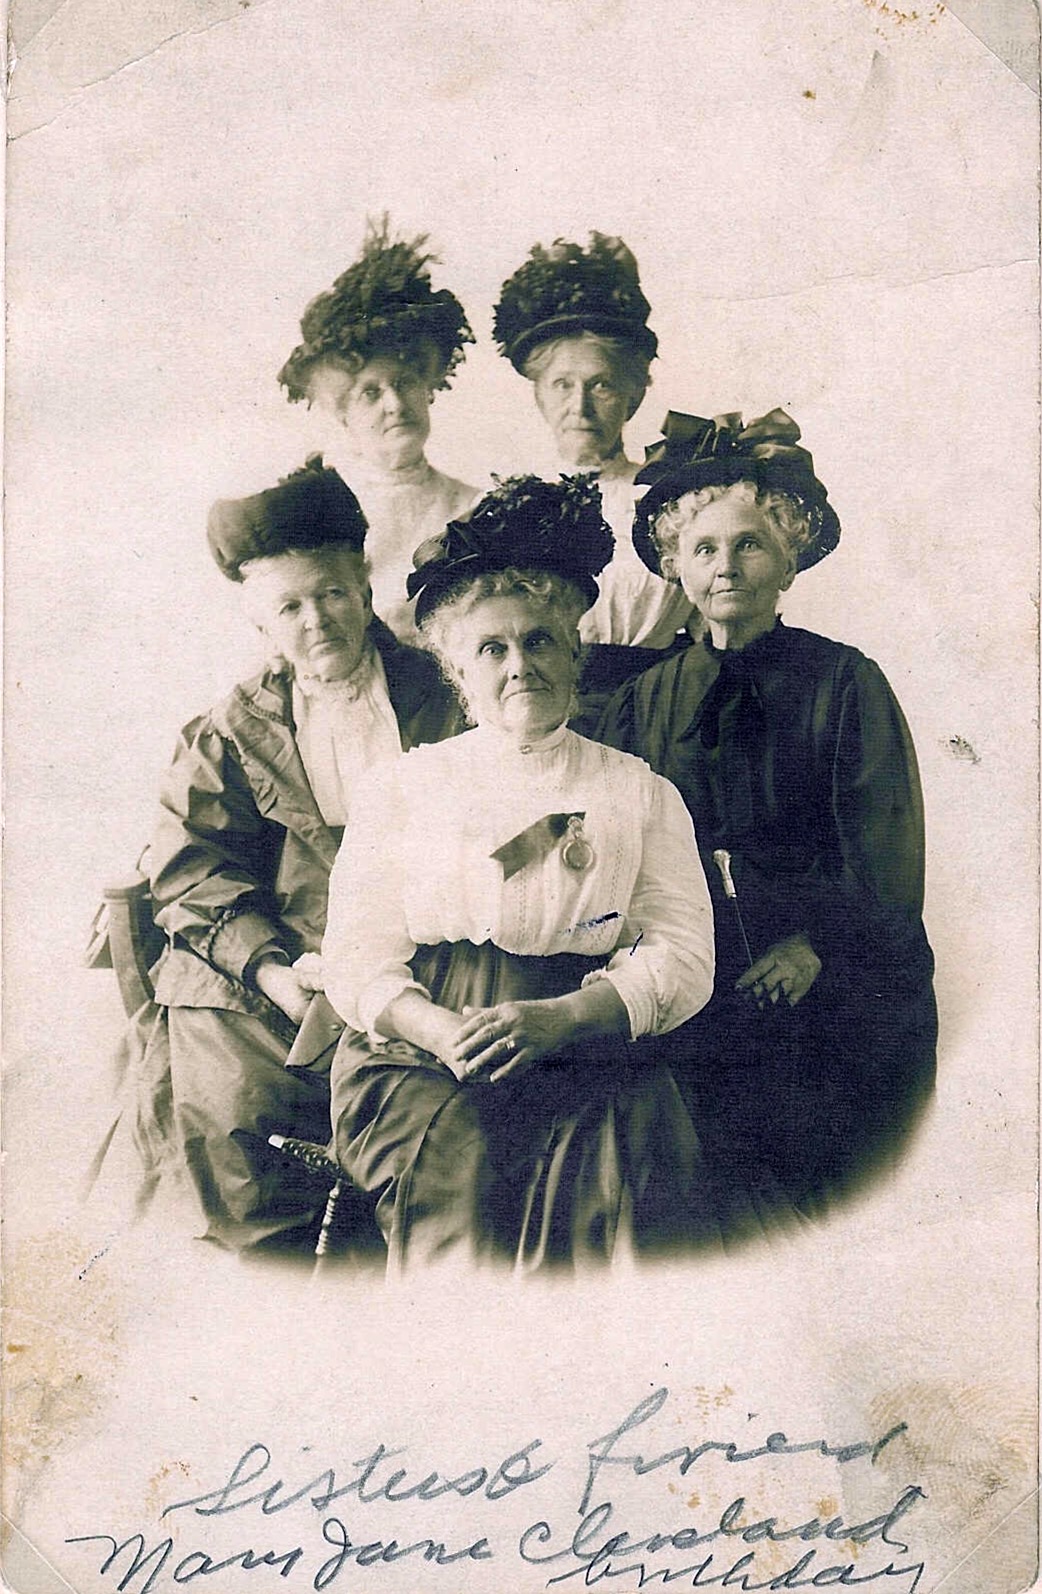 My 2nd Great Grandmother Mary Jane Abbott Iveson Cleveland with Sisters & Friend on her birthday, c. 25 Aug 1890s, prob. Dover, Lenawee, Michigan  